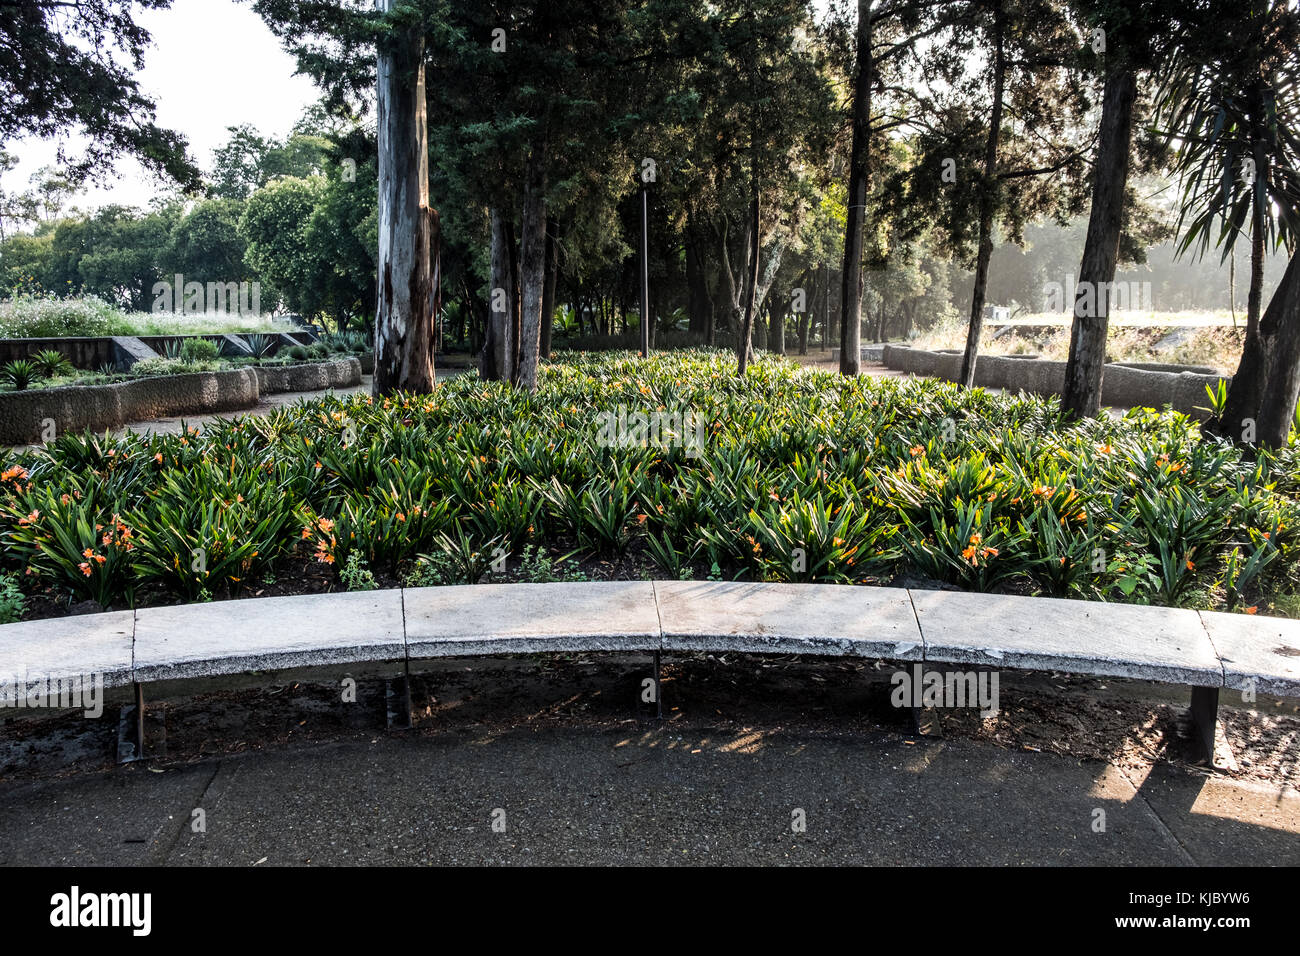 Torres de Chapultepec (Vessels of the 4 Tanks storage of the Carcamo Dolores) Stock Photo